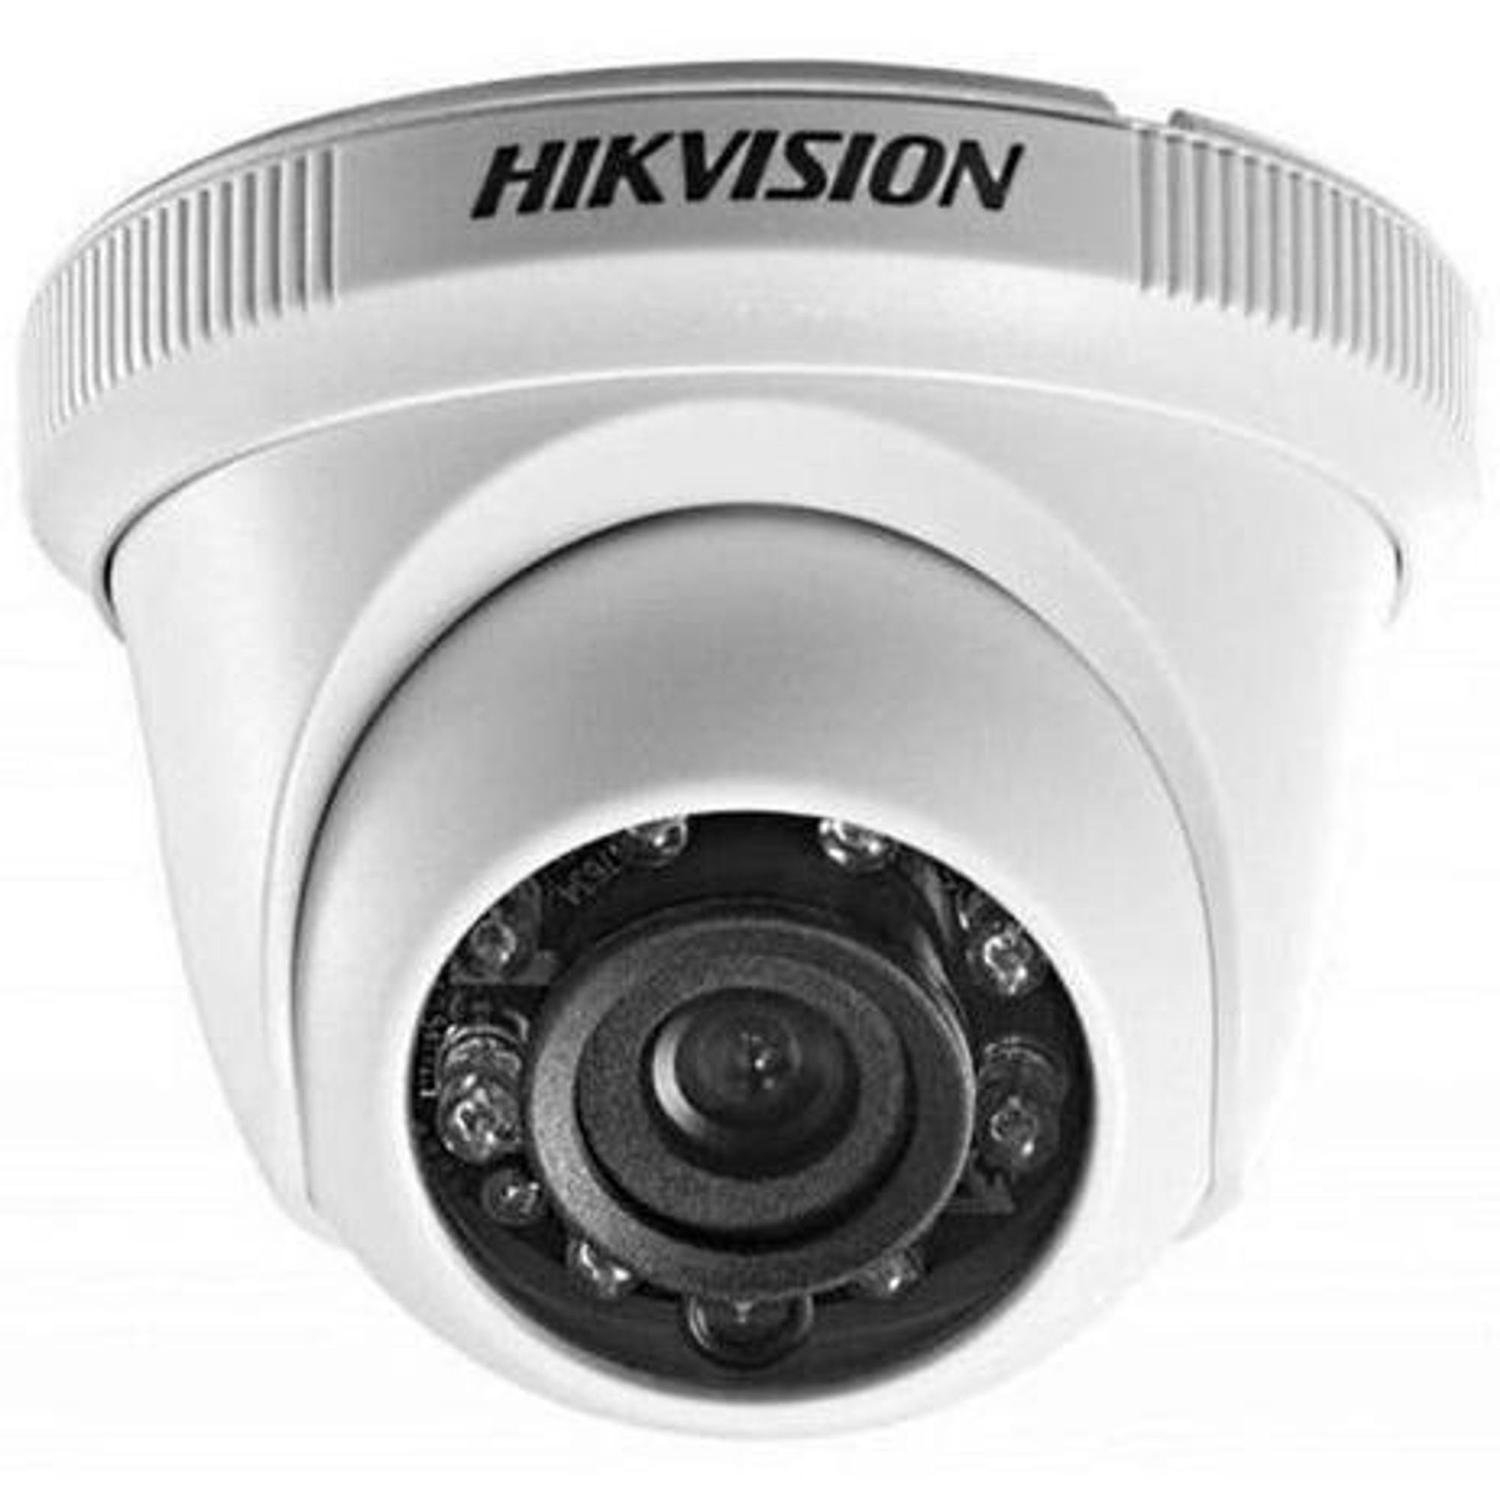 CAMERA HIKVISION DOME MULTI HD 4X1 DS-2CE56D0T-IRPF 2.8MM IR20 1080P - 1